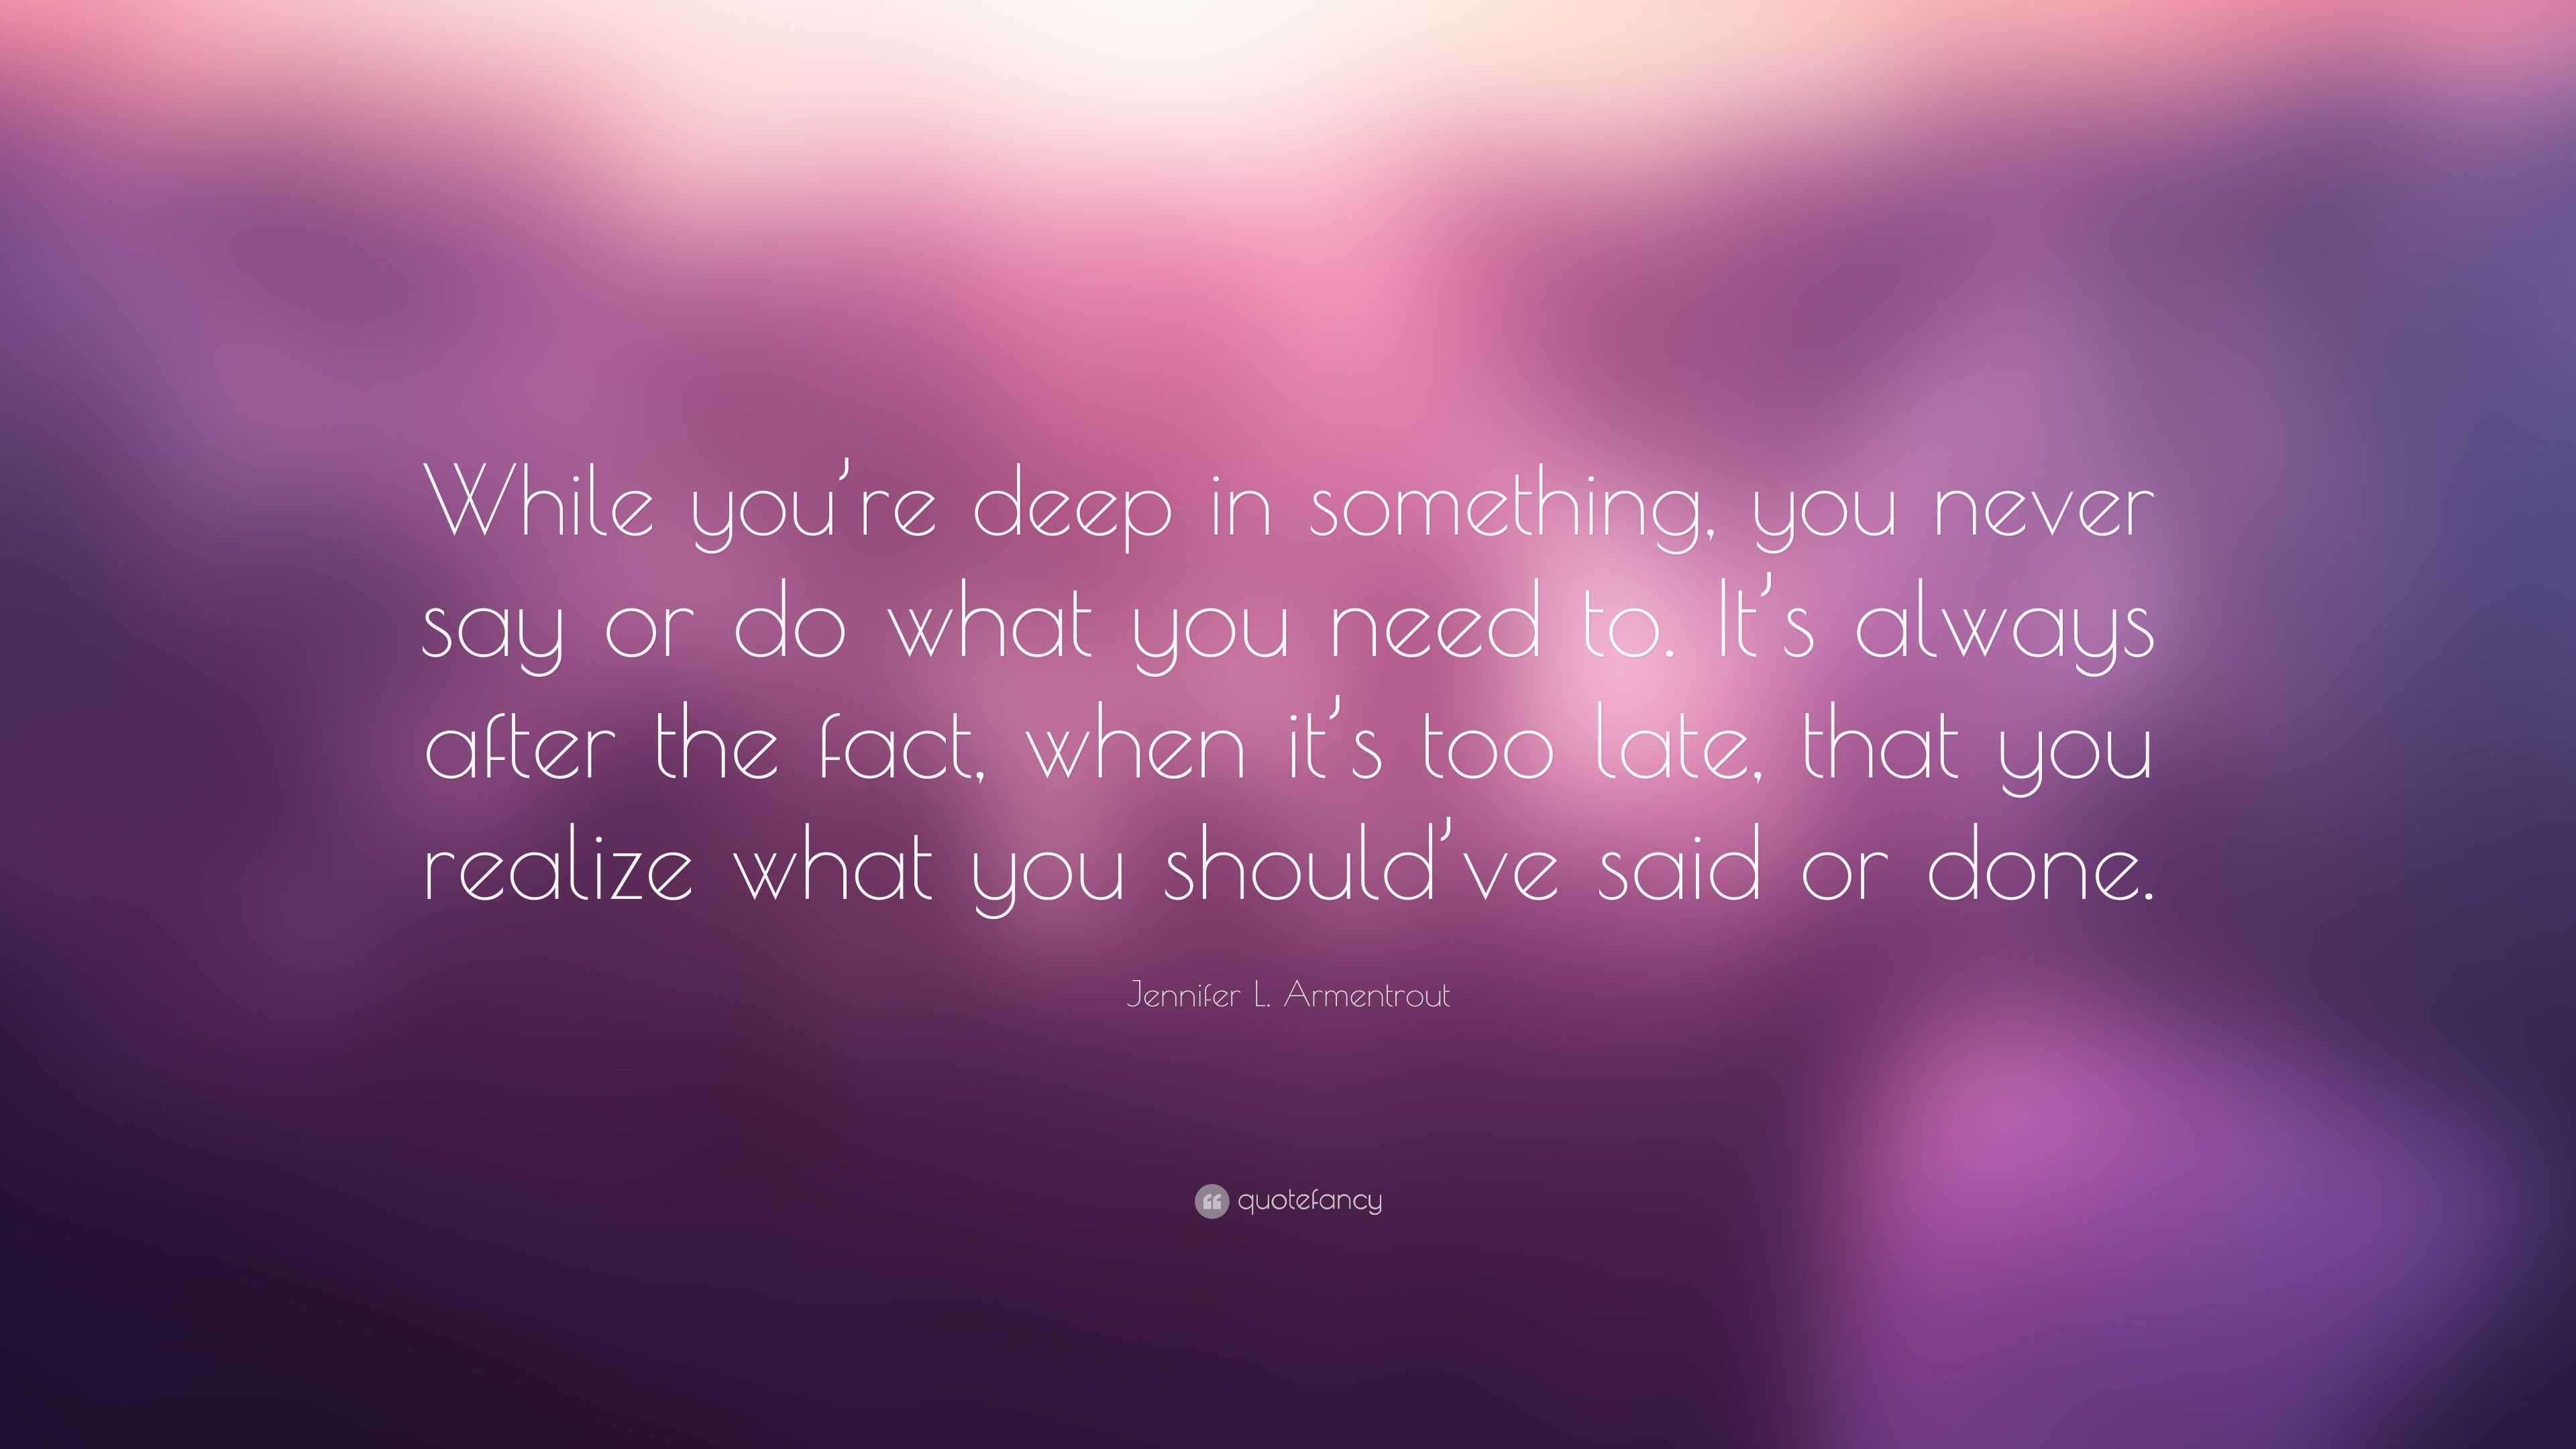 Jennifer L. Armentrout Quote: “While you’re deep in something, you ...